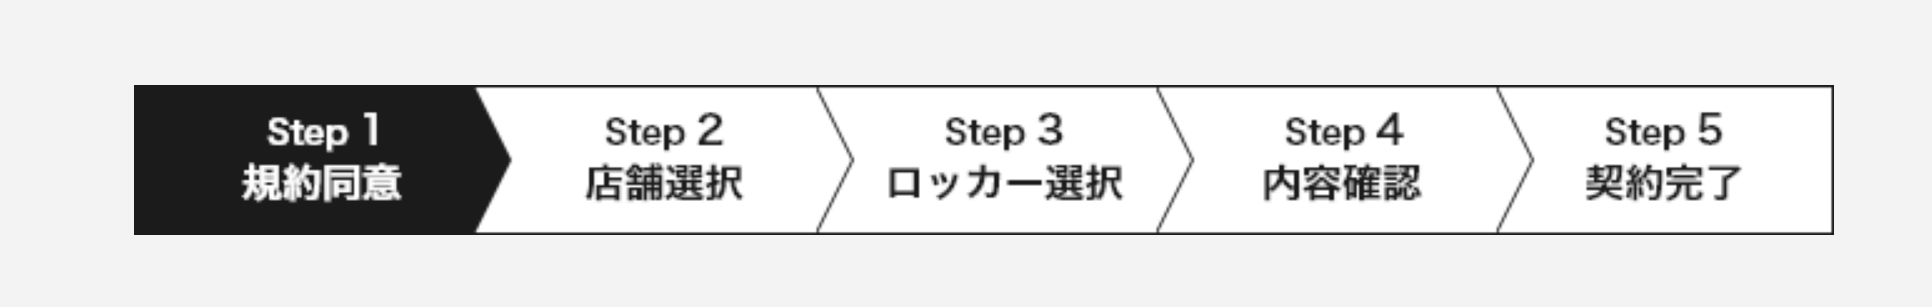 Contract_Step